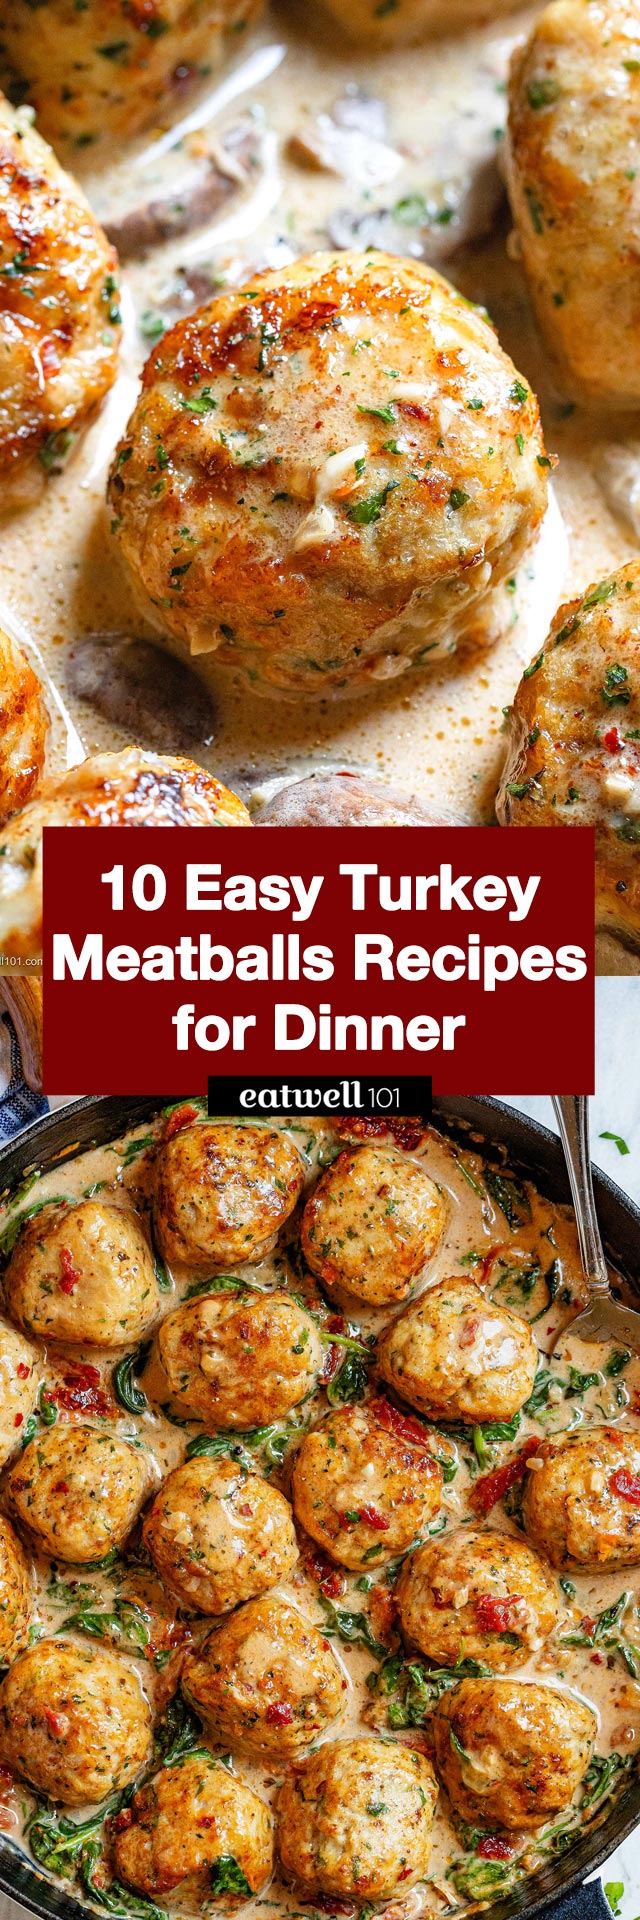 Our delicious turkey meatball recipes will hit the spot! From classic comfort foods to unexpected twists, these turkey meatball recipes will make dinnertime a breeze.